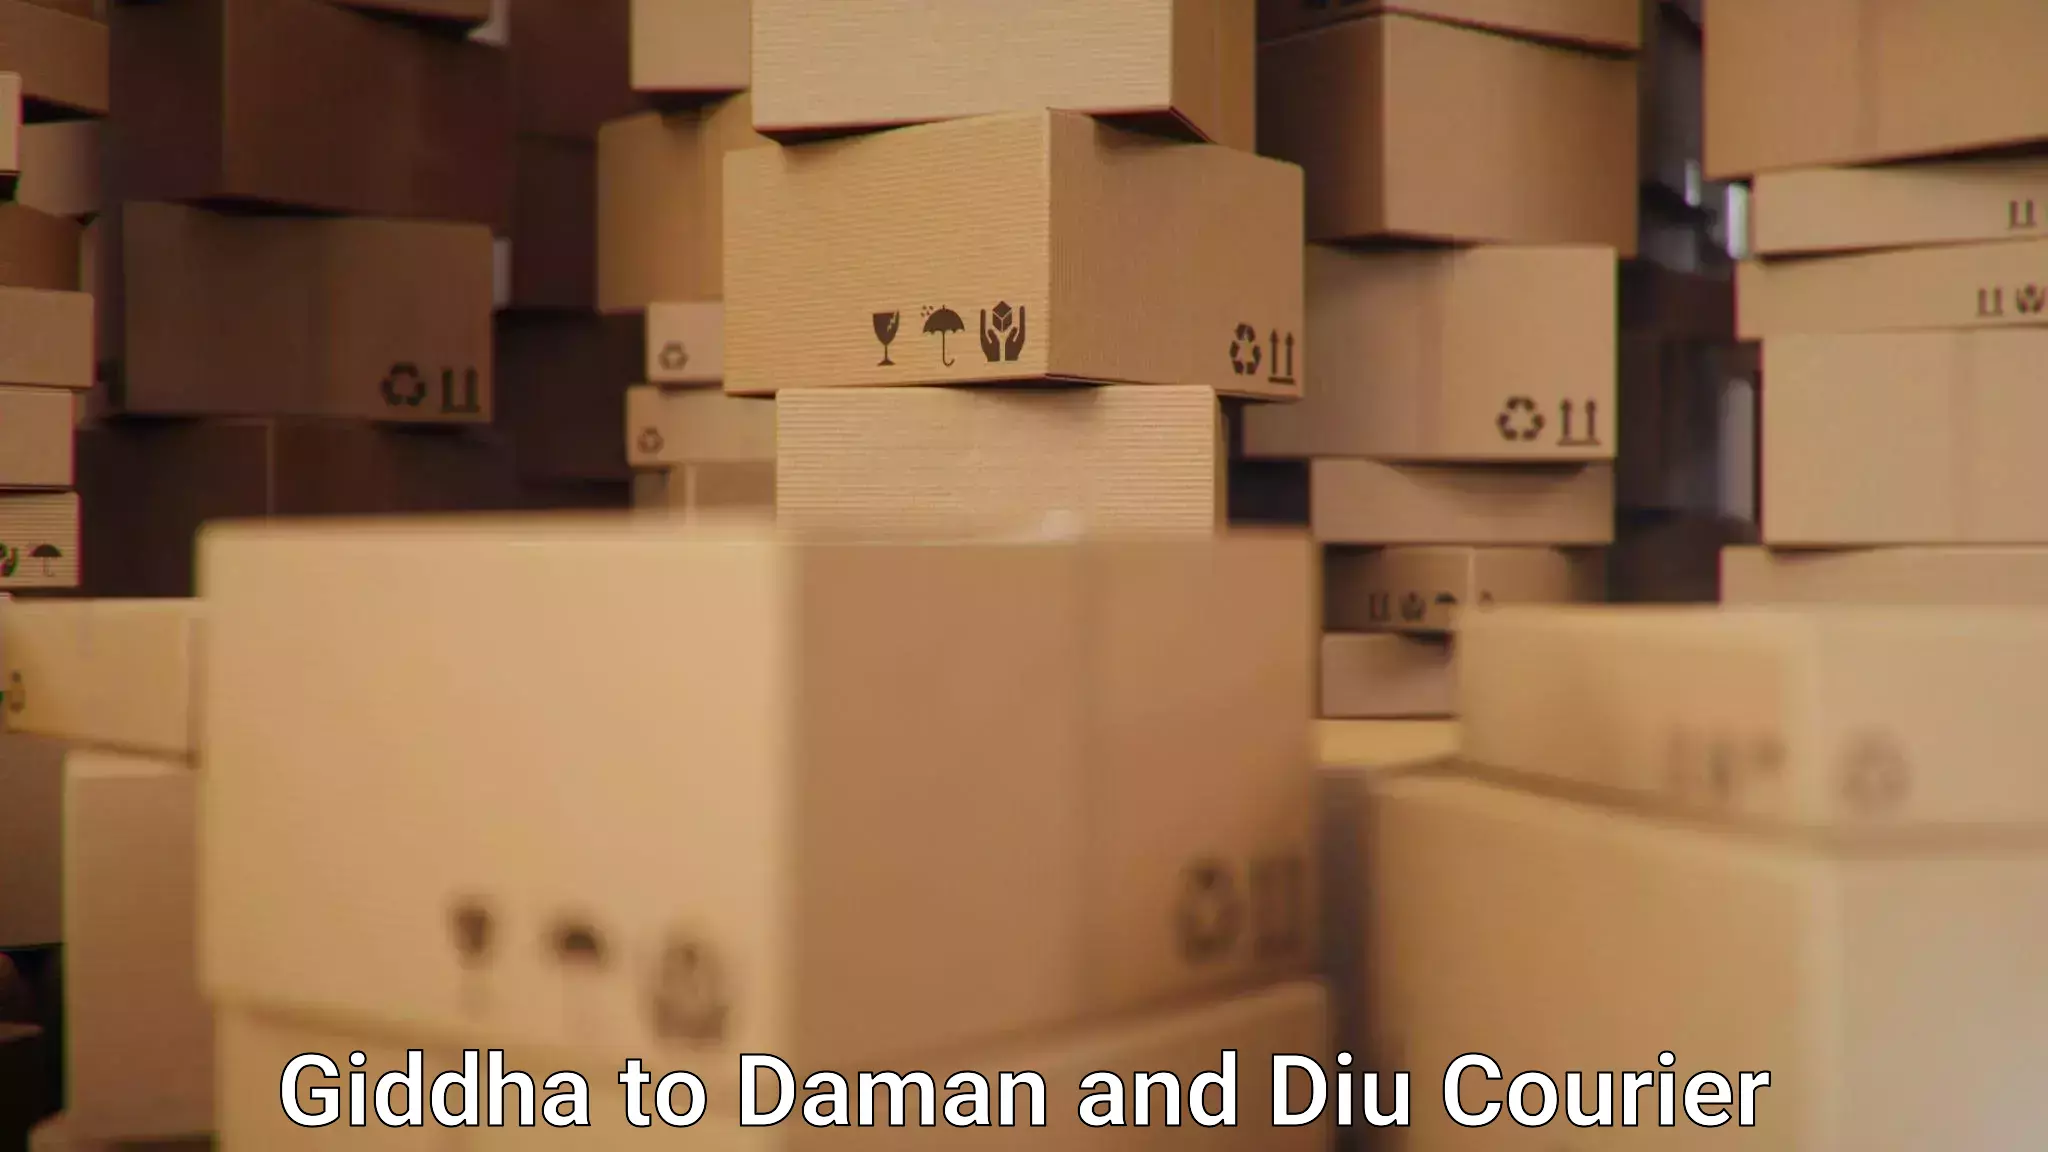 Personalized courier experiences Giddha to Daman and Diu